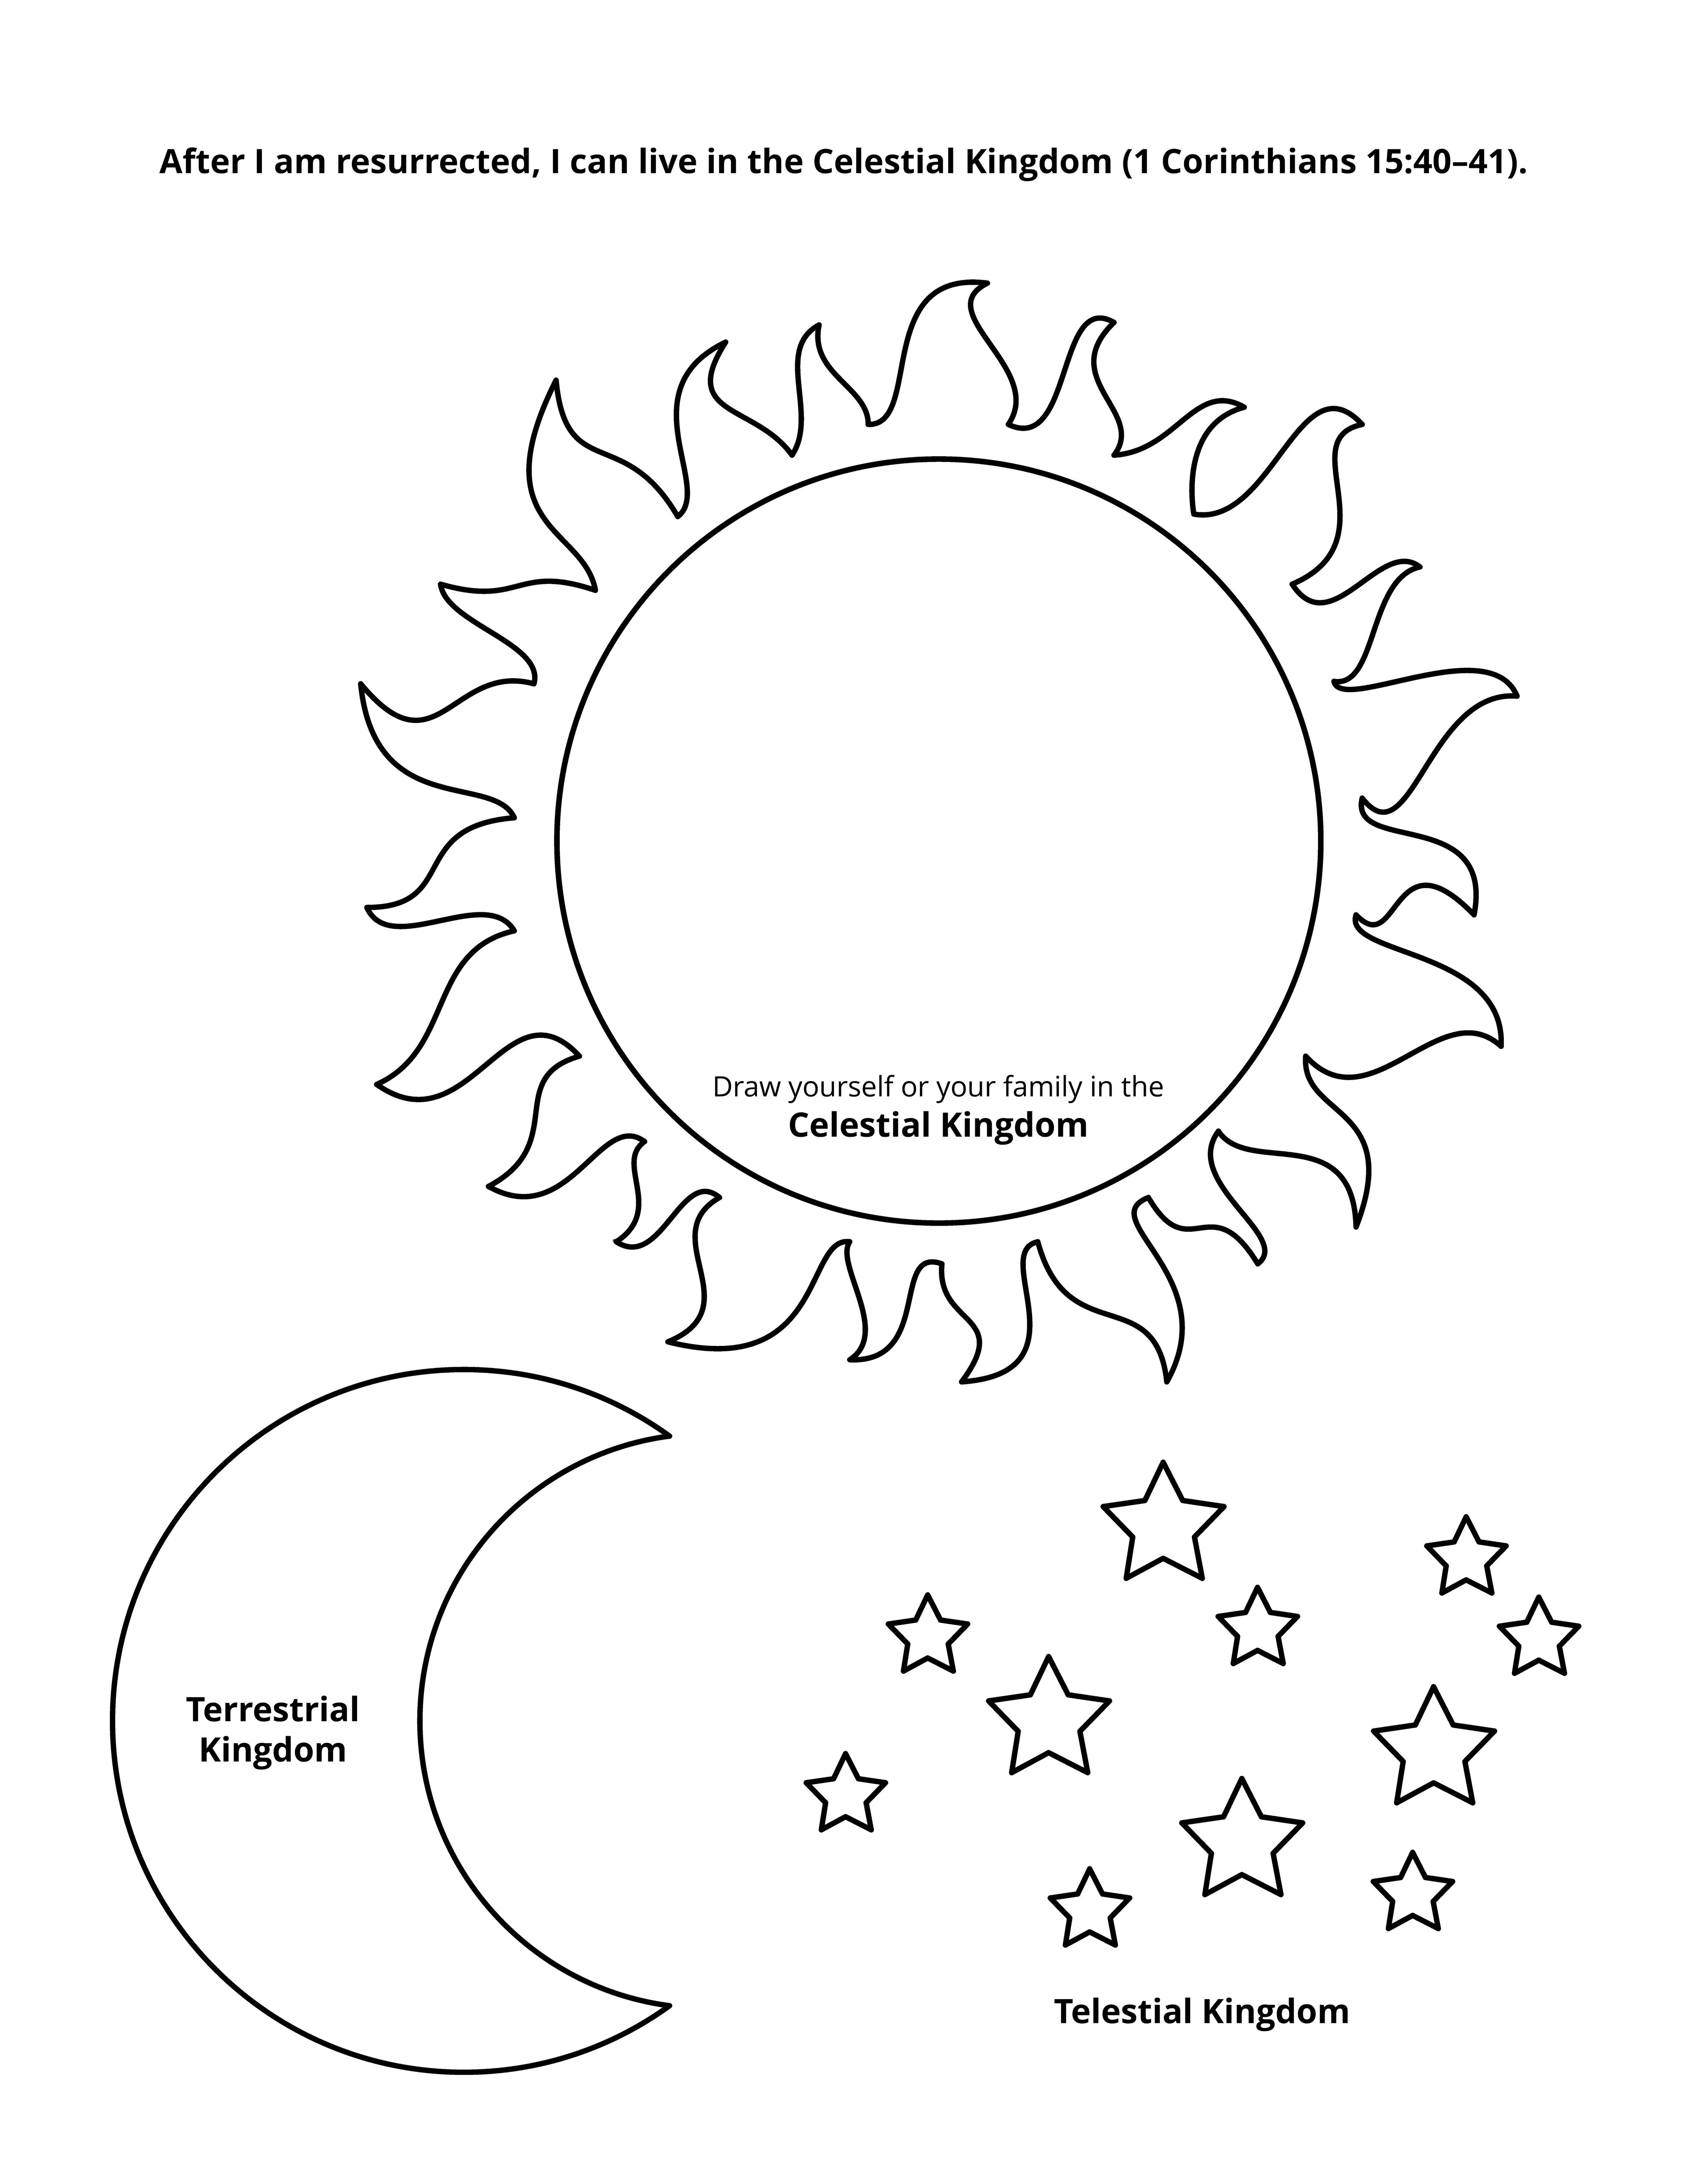 A drawing of the sun, moon, and stars, symbolizing the celestial, terrestrial, and telestial kingdoms.